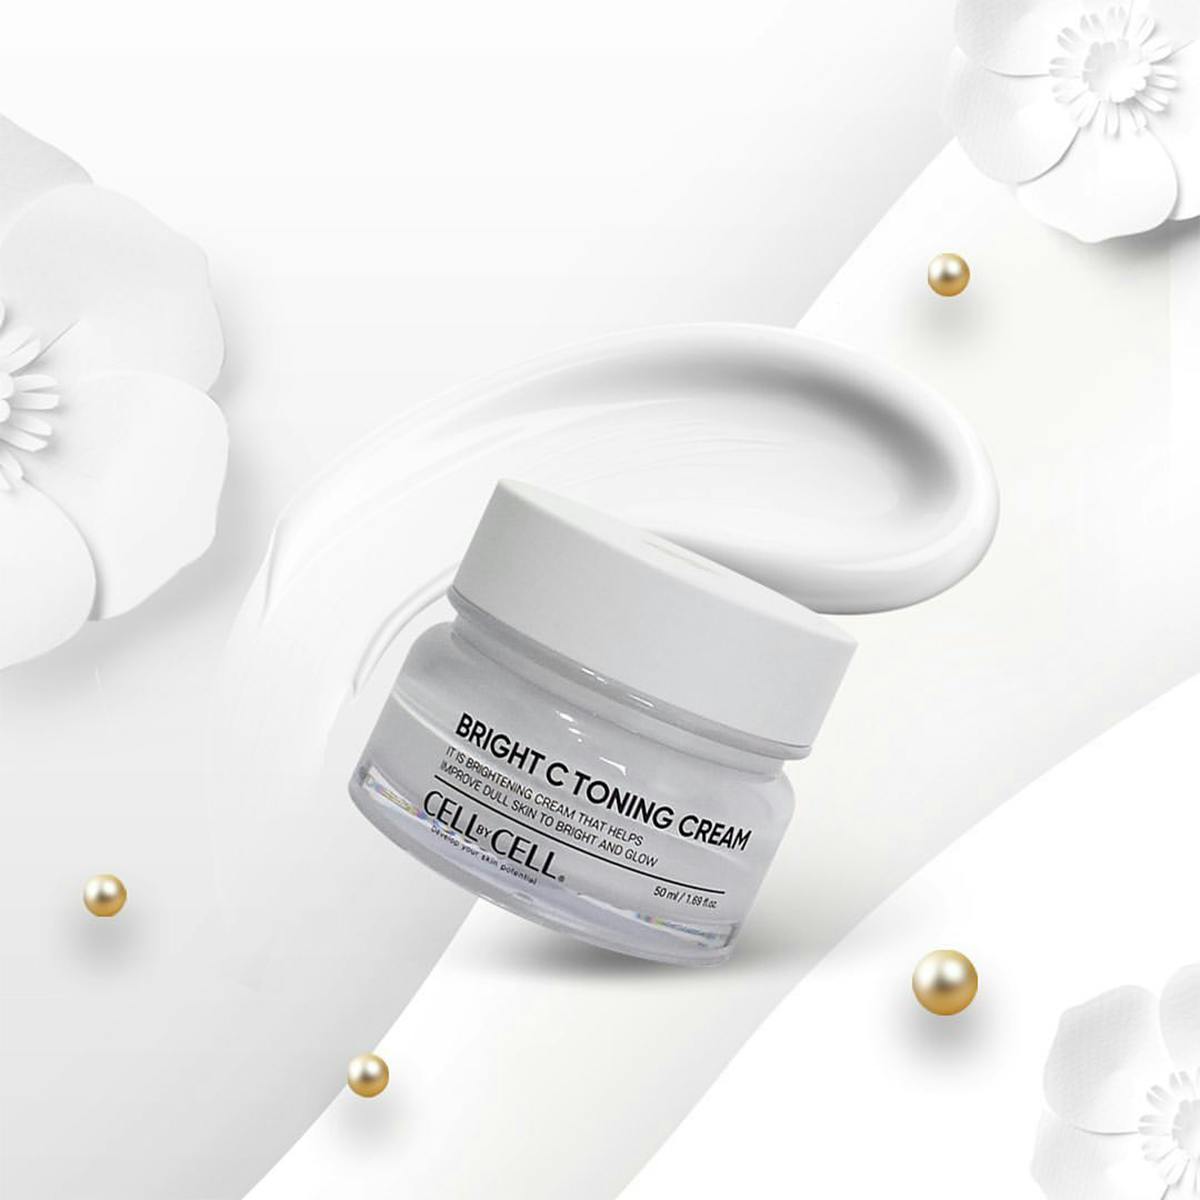 CELL BY CELL - BRIGHT C TONING CREAM 50 ml.